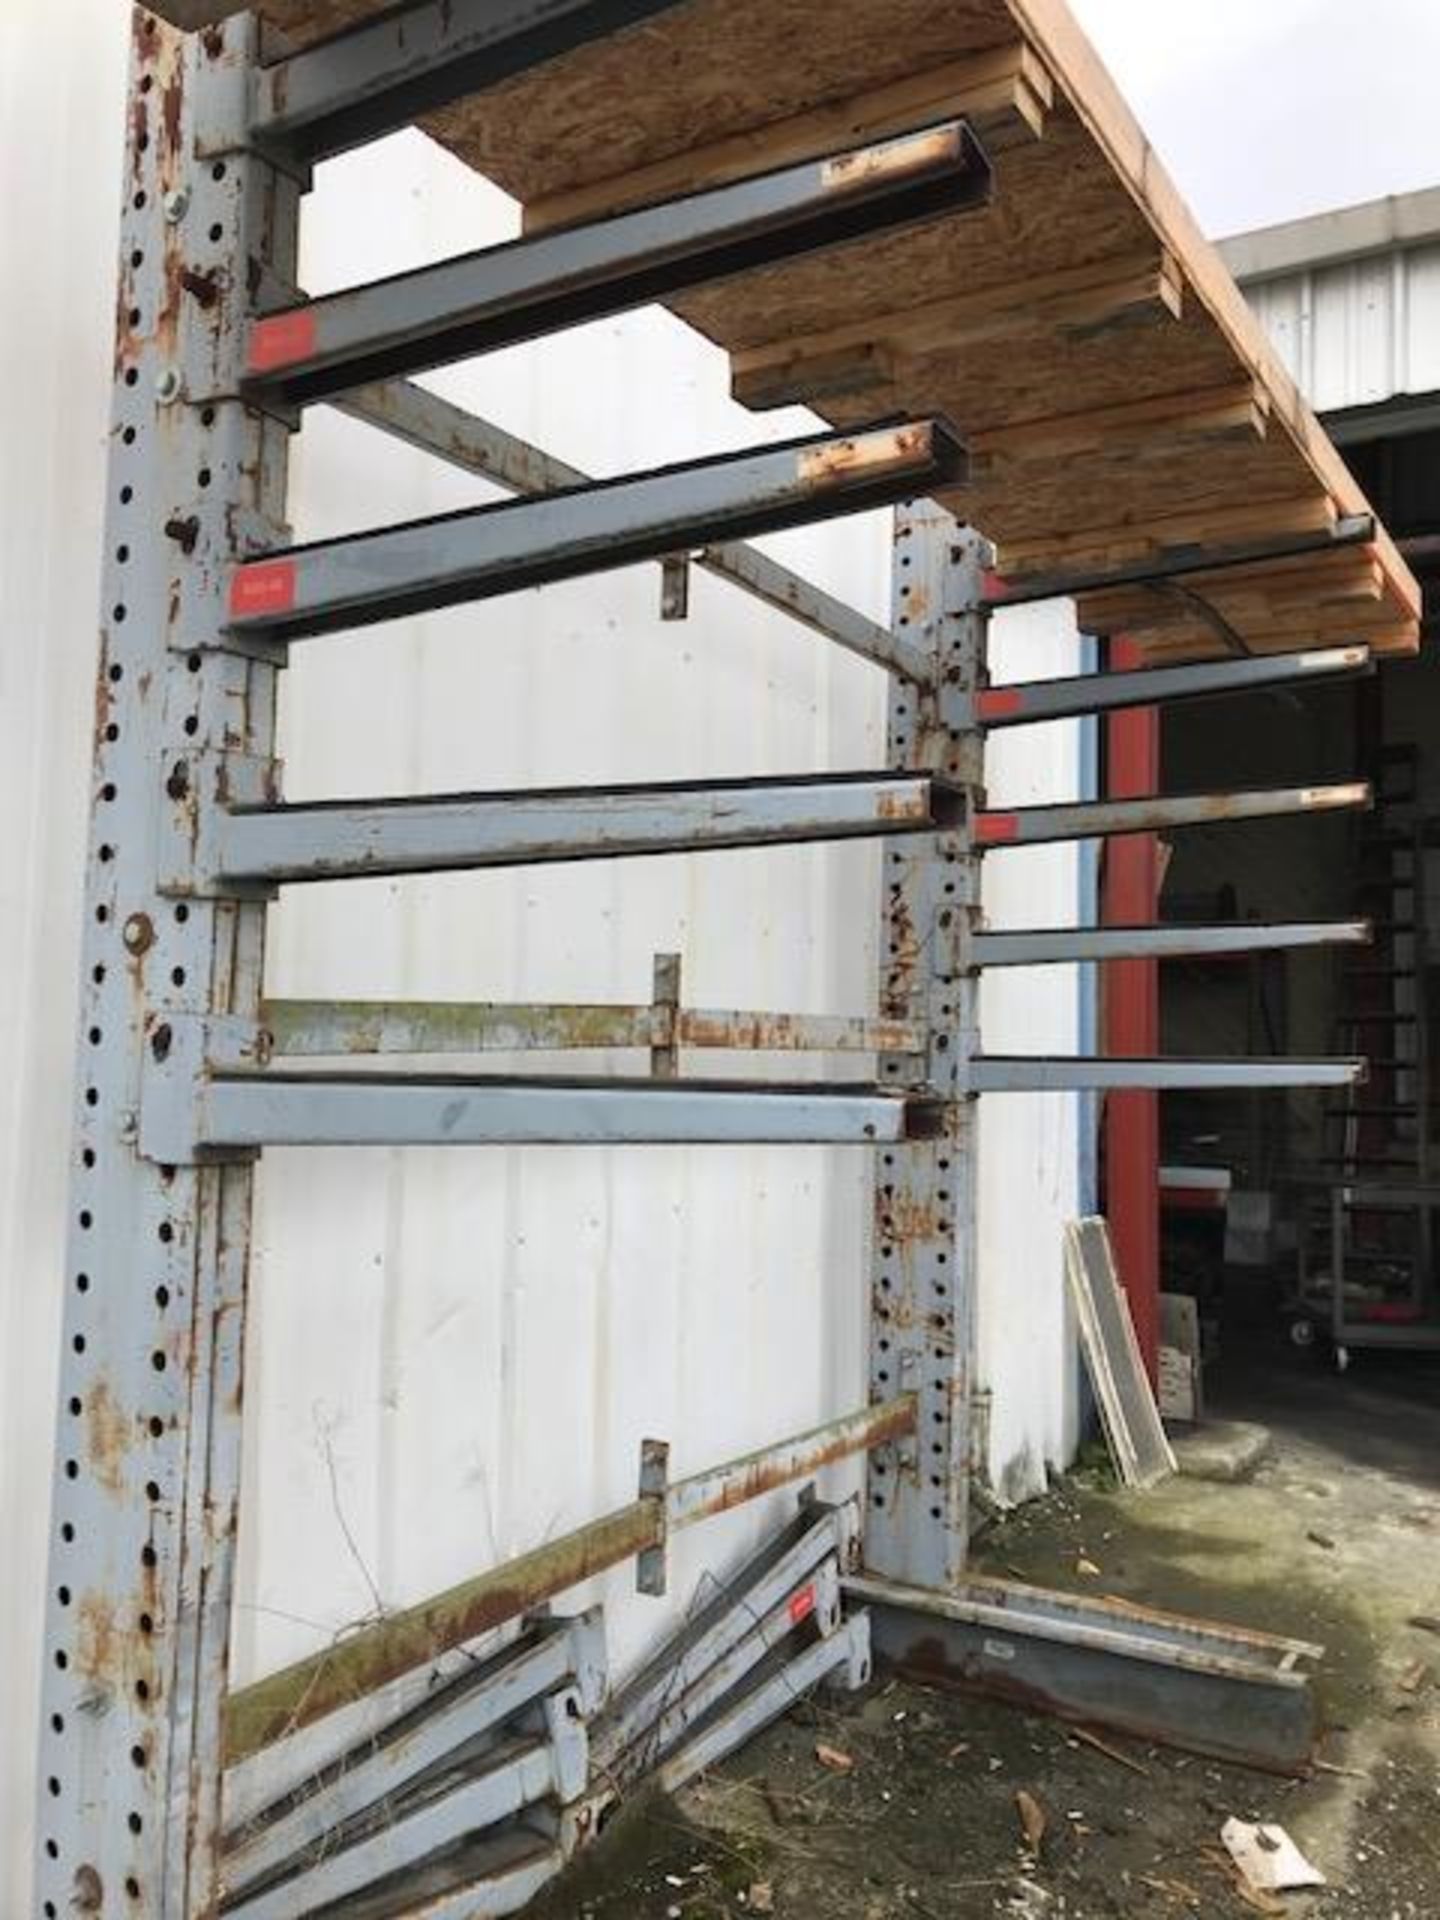 10' x 8' x 3', 6 Shelves Cantilever Rack - Image 2 of 2